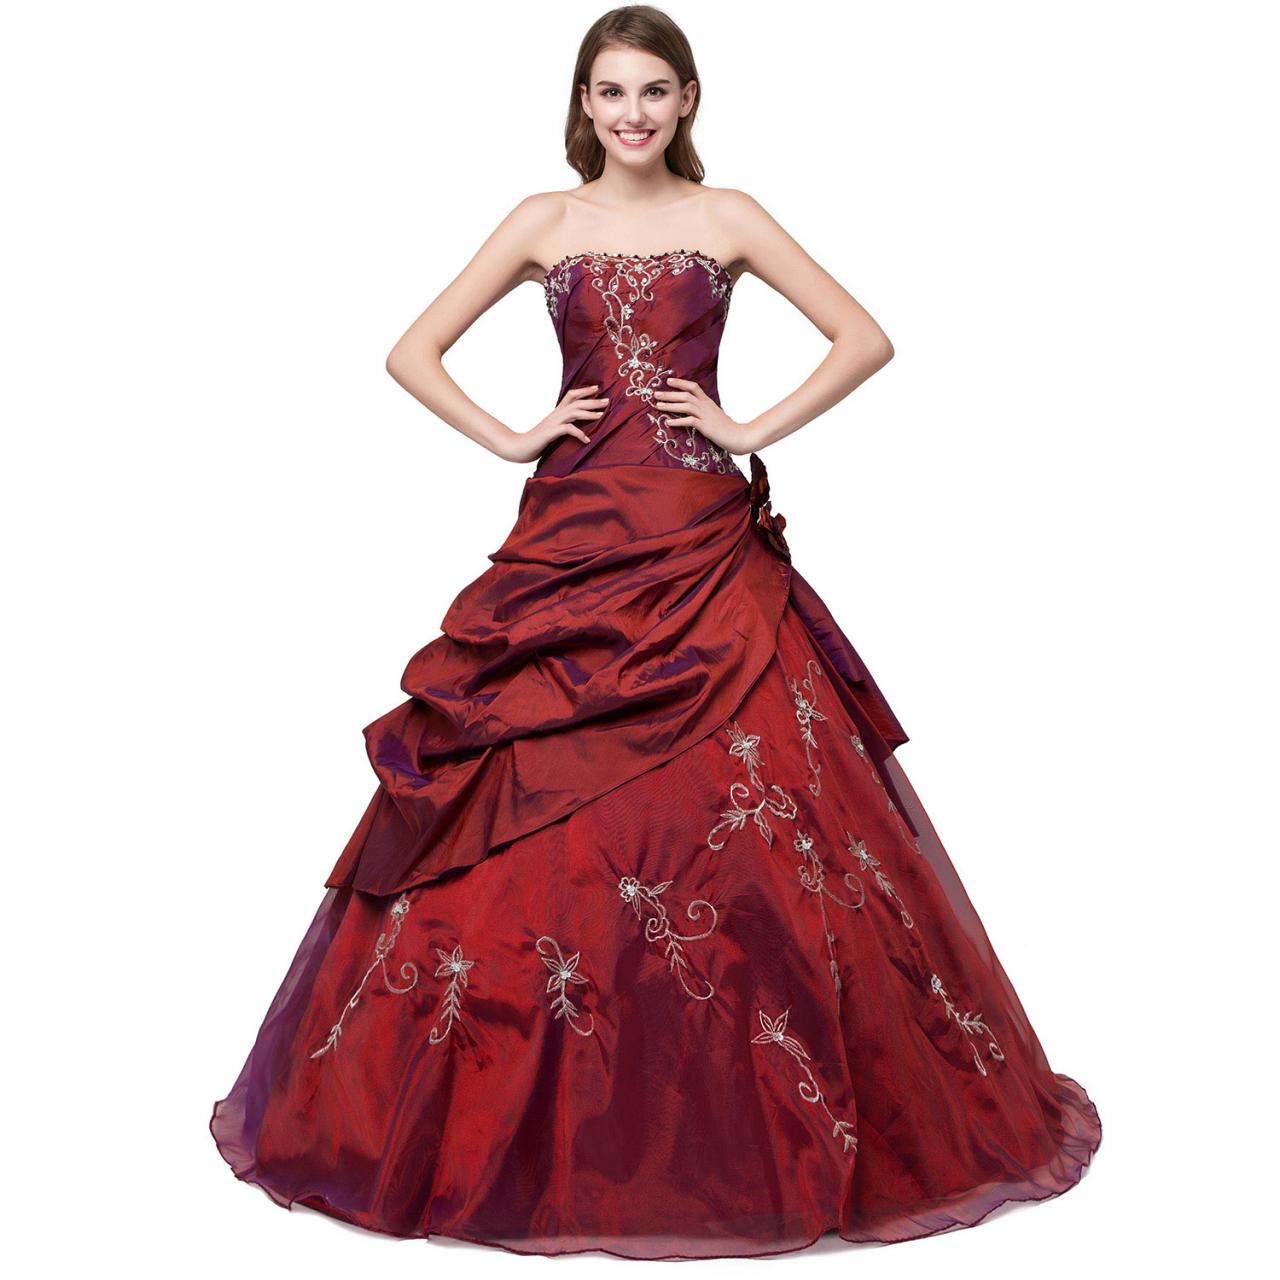 Charming Floor Length Burgundy Prom Gown Featuring Embroidered And Beaded Embellished Sweetheart Bodice, Ball Gown, Formal Dresses,burgundy